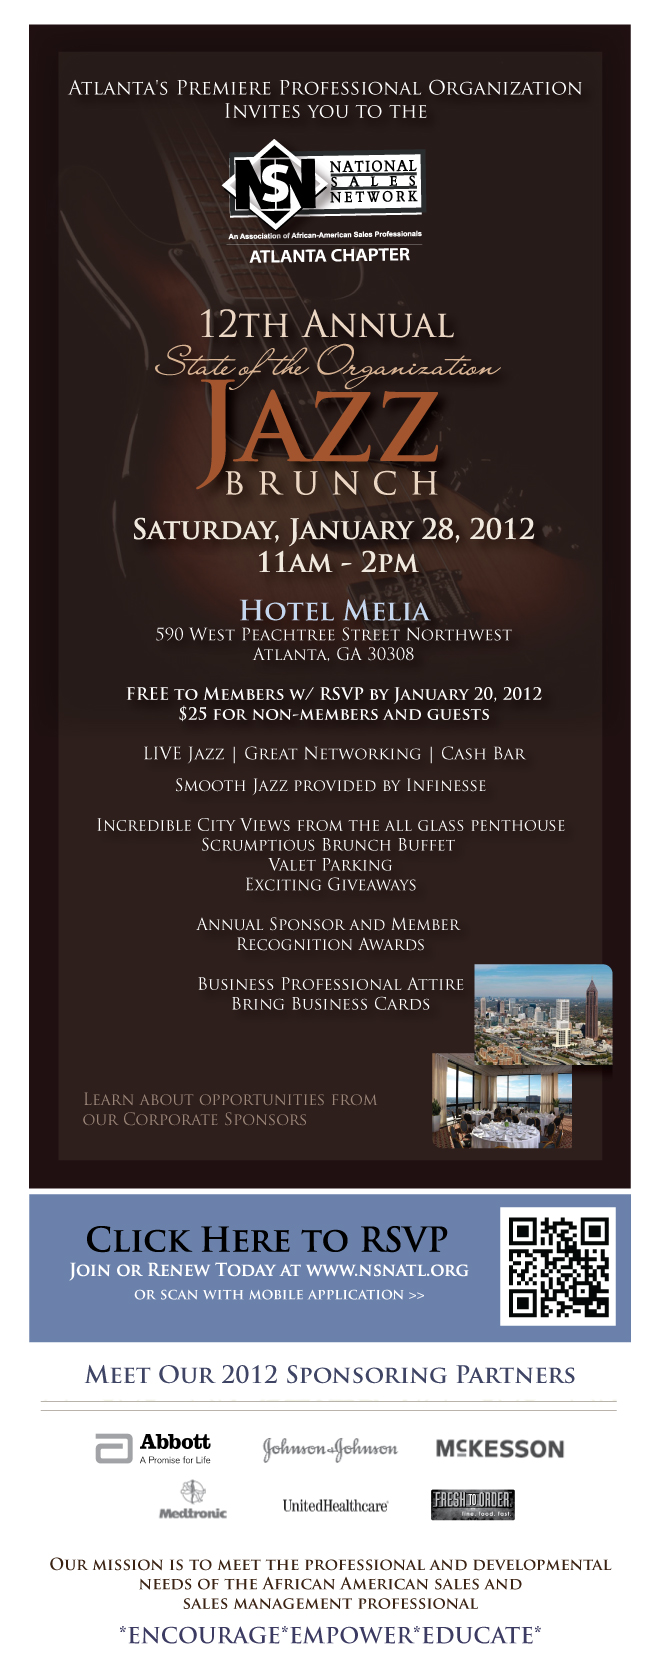 NSN Atlanta 12th Annual State of the Organization Jazz Brunch | Saturday, January 28, 2012 | Hotel Melia | Limited Tickets Available